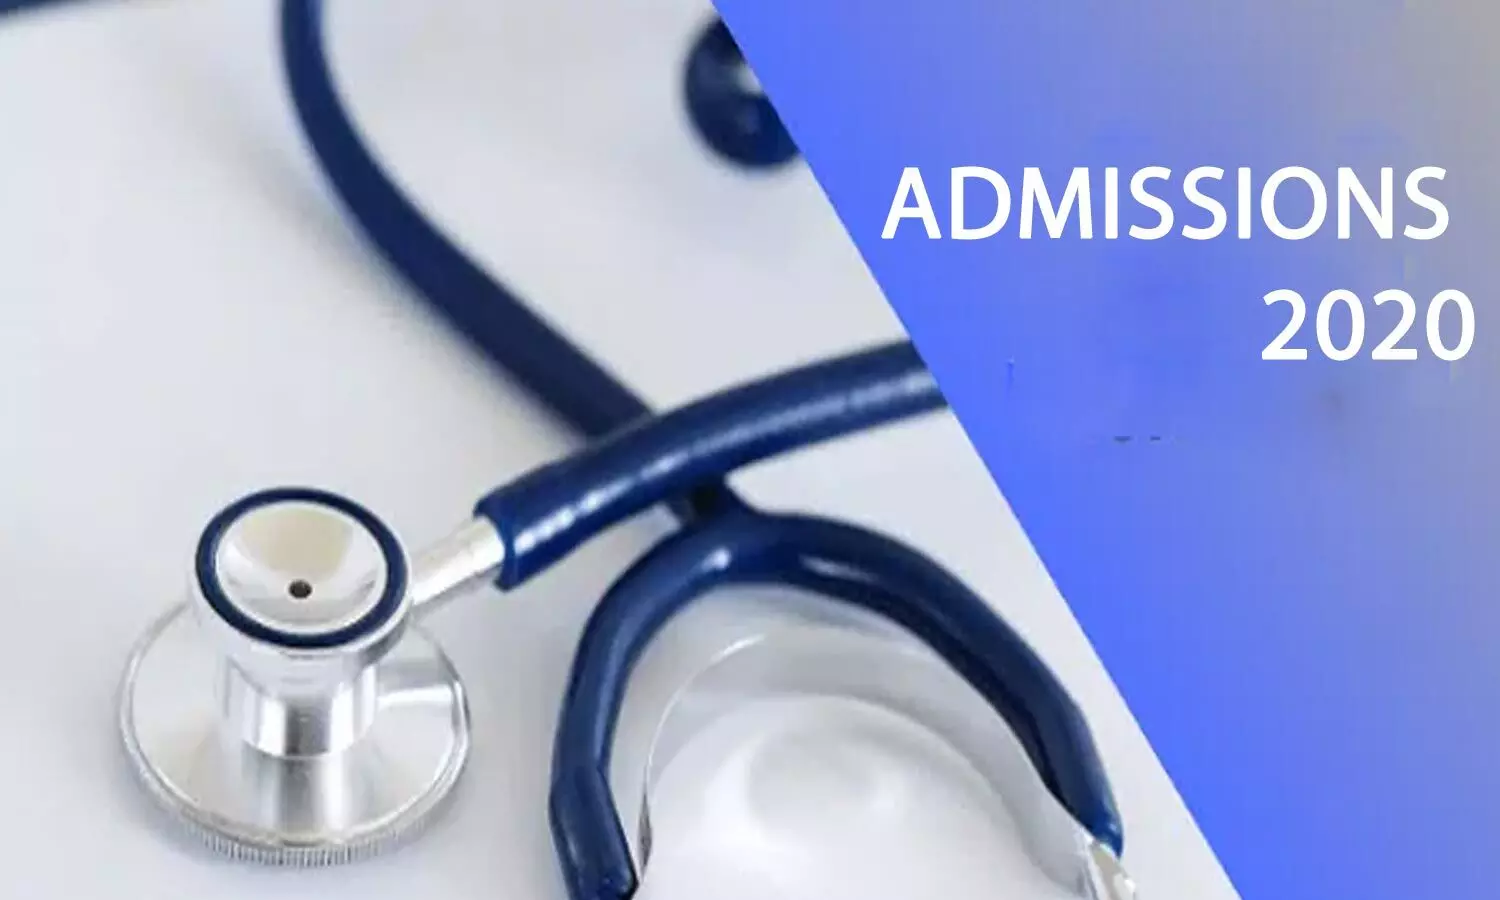 DMER Haryana invites applications for ANM, GNM, MPHW Nursing Courses 2020-21